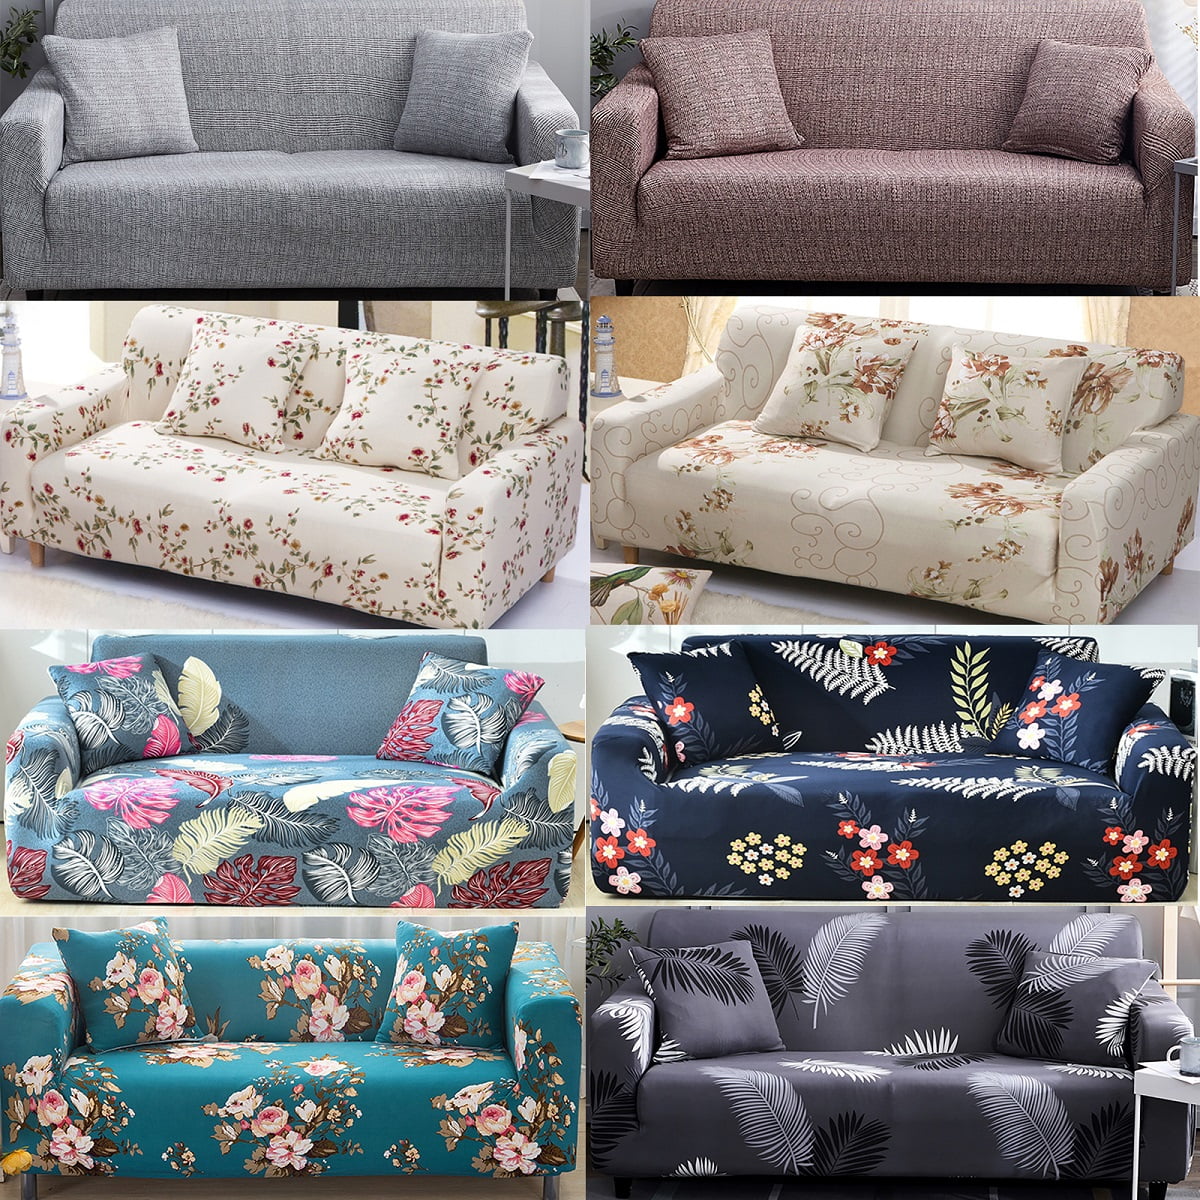 Elastic Fashion New Sofa Stretch 1 2 3 4 Seater Cover Protector Couch Slipcover 